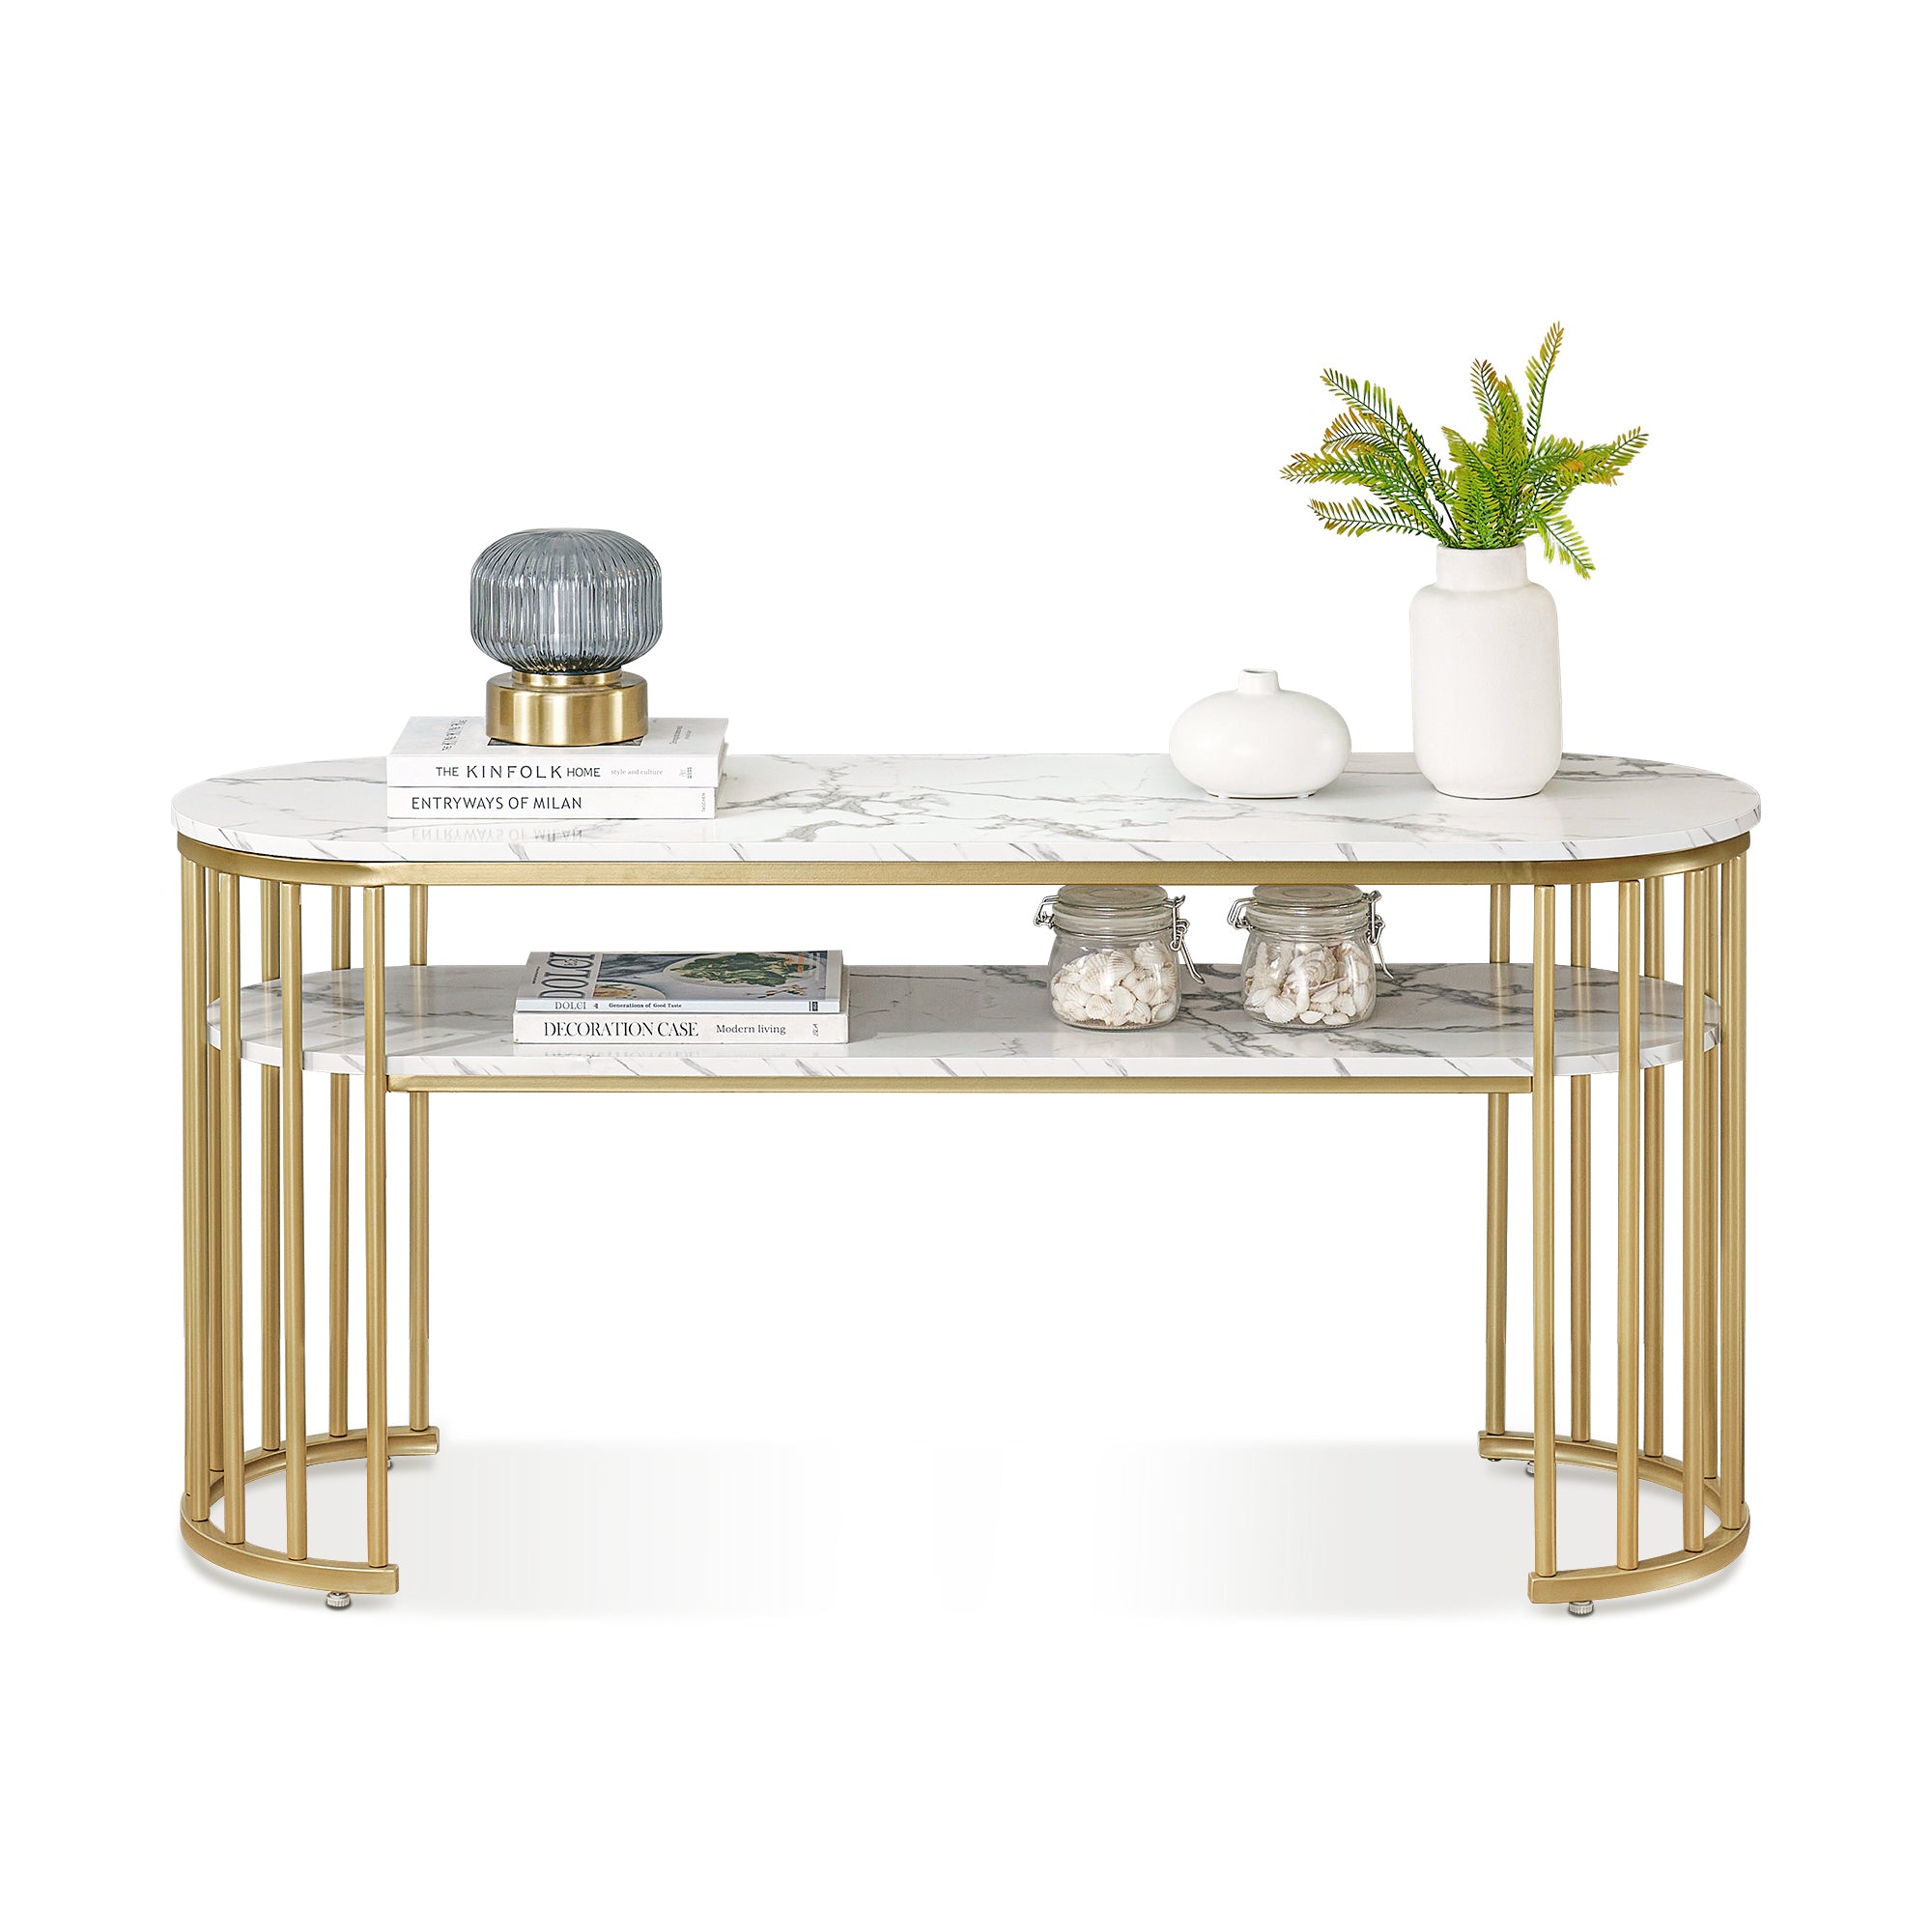 ivinta White Sofa Table, Modern Faux Marble Top Console Table with Gold Metal Frame, Narrow Entryway Table with Storage Shelf for Living Room